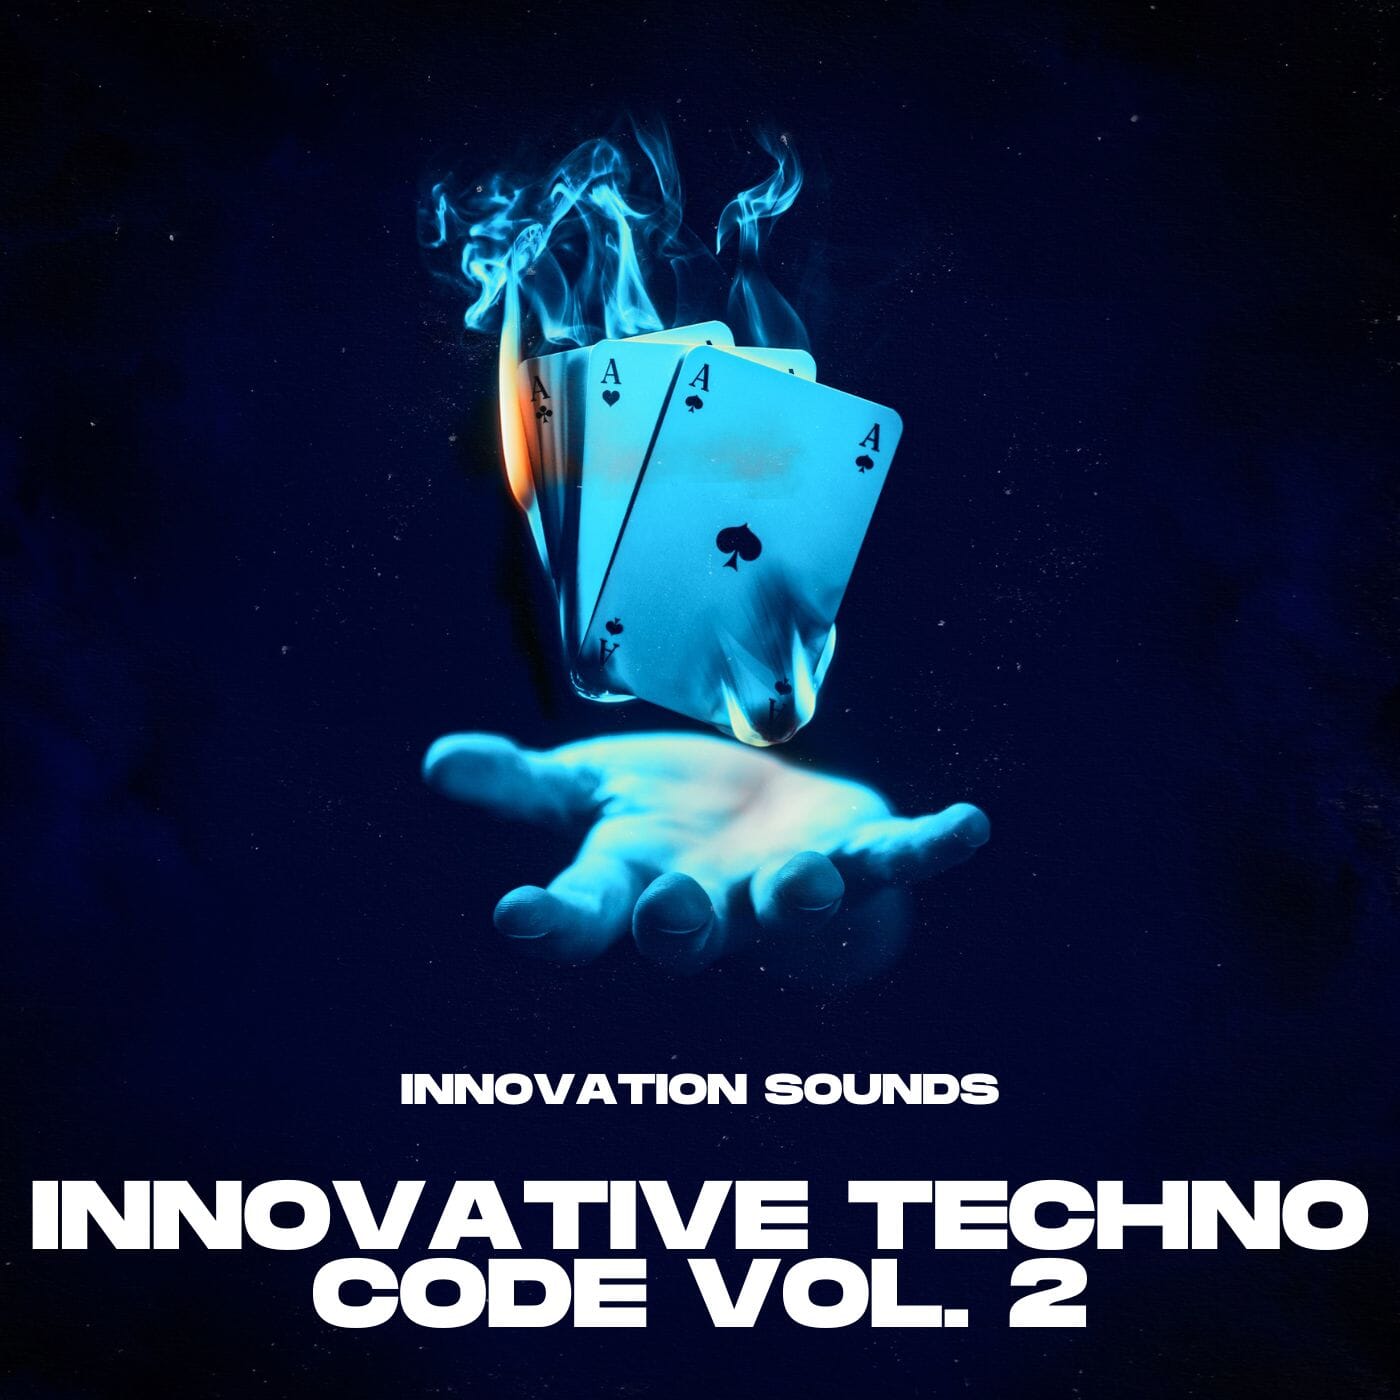 Innovative Techno Code Vol. 2 - Midi and Wave Loops Sample Pack Innovation Sounds